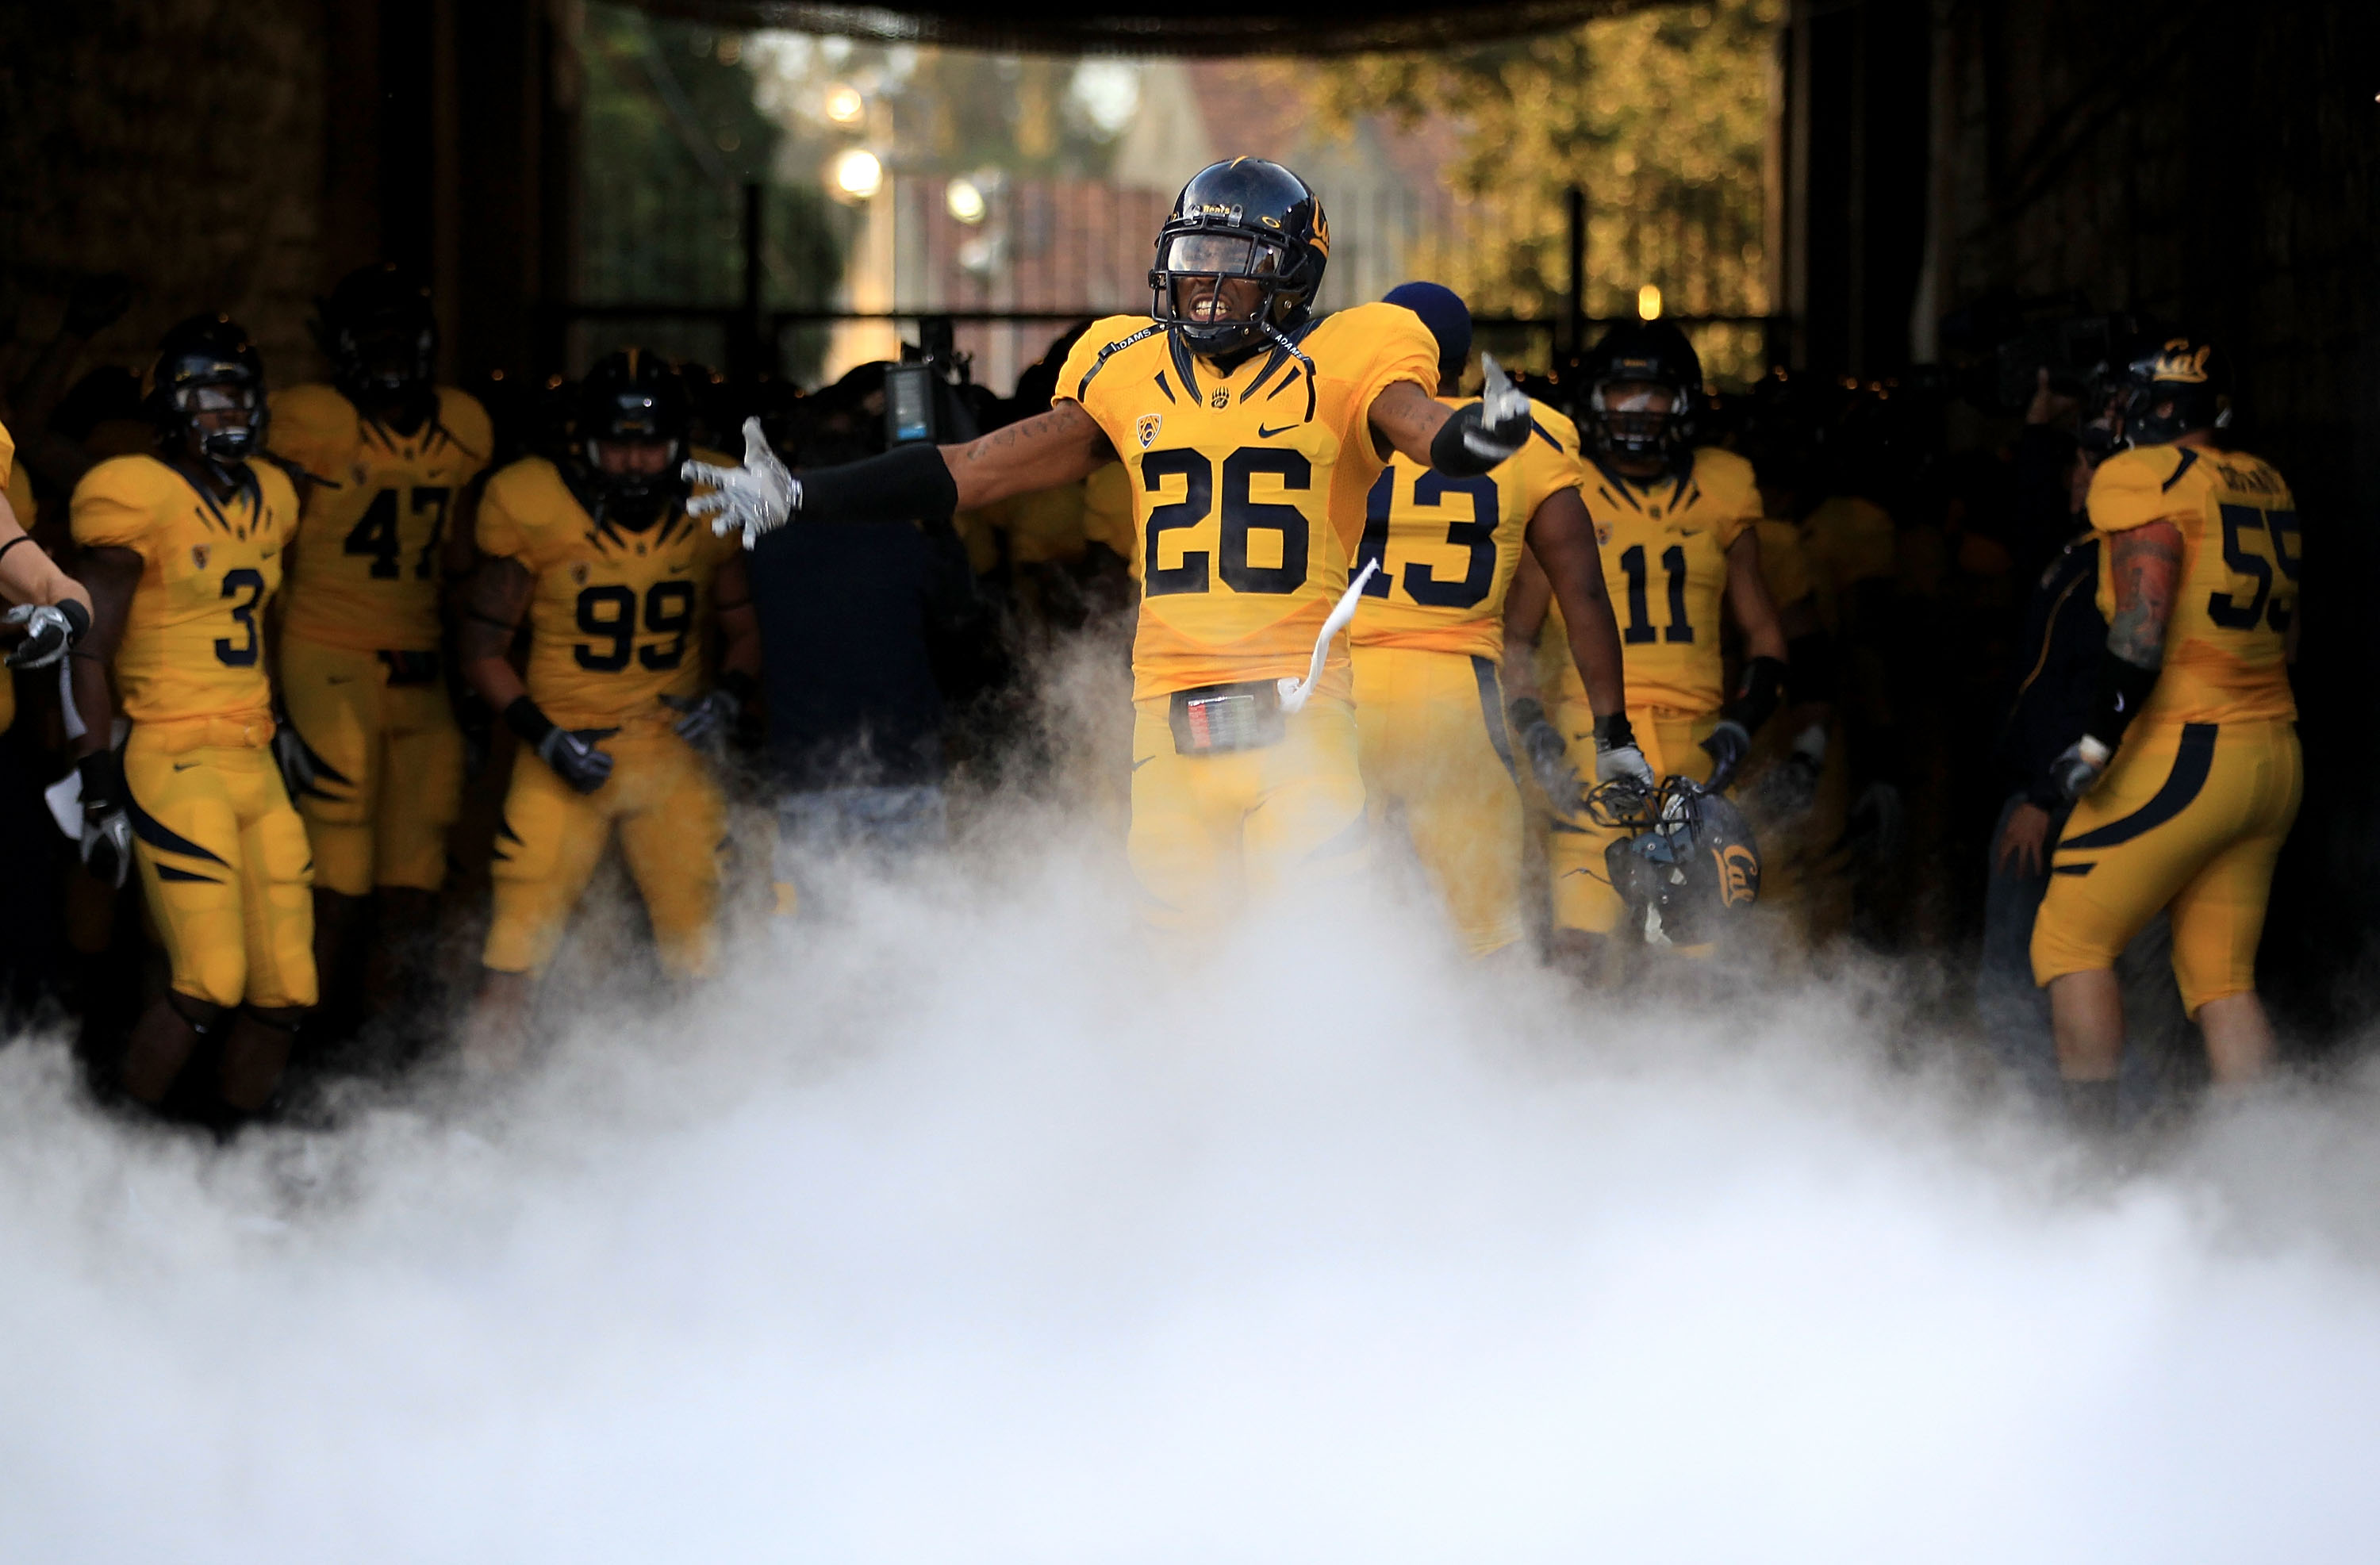 BERKELEY, CA - NOVEMBER 13:  Darian Hagan #26 of the California Golden Bears enters the stadium for their game against the Oregon Ducks at California Memorial Stadium on November 13, 2010 in Berkeley, California.  (Photo by Ezra Shaw/Getty Images)